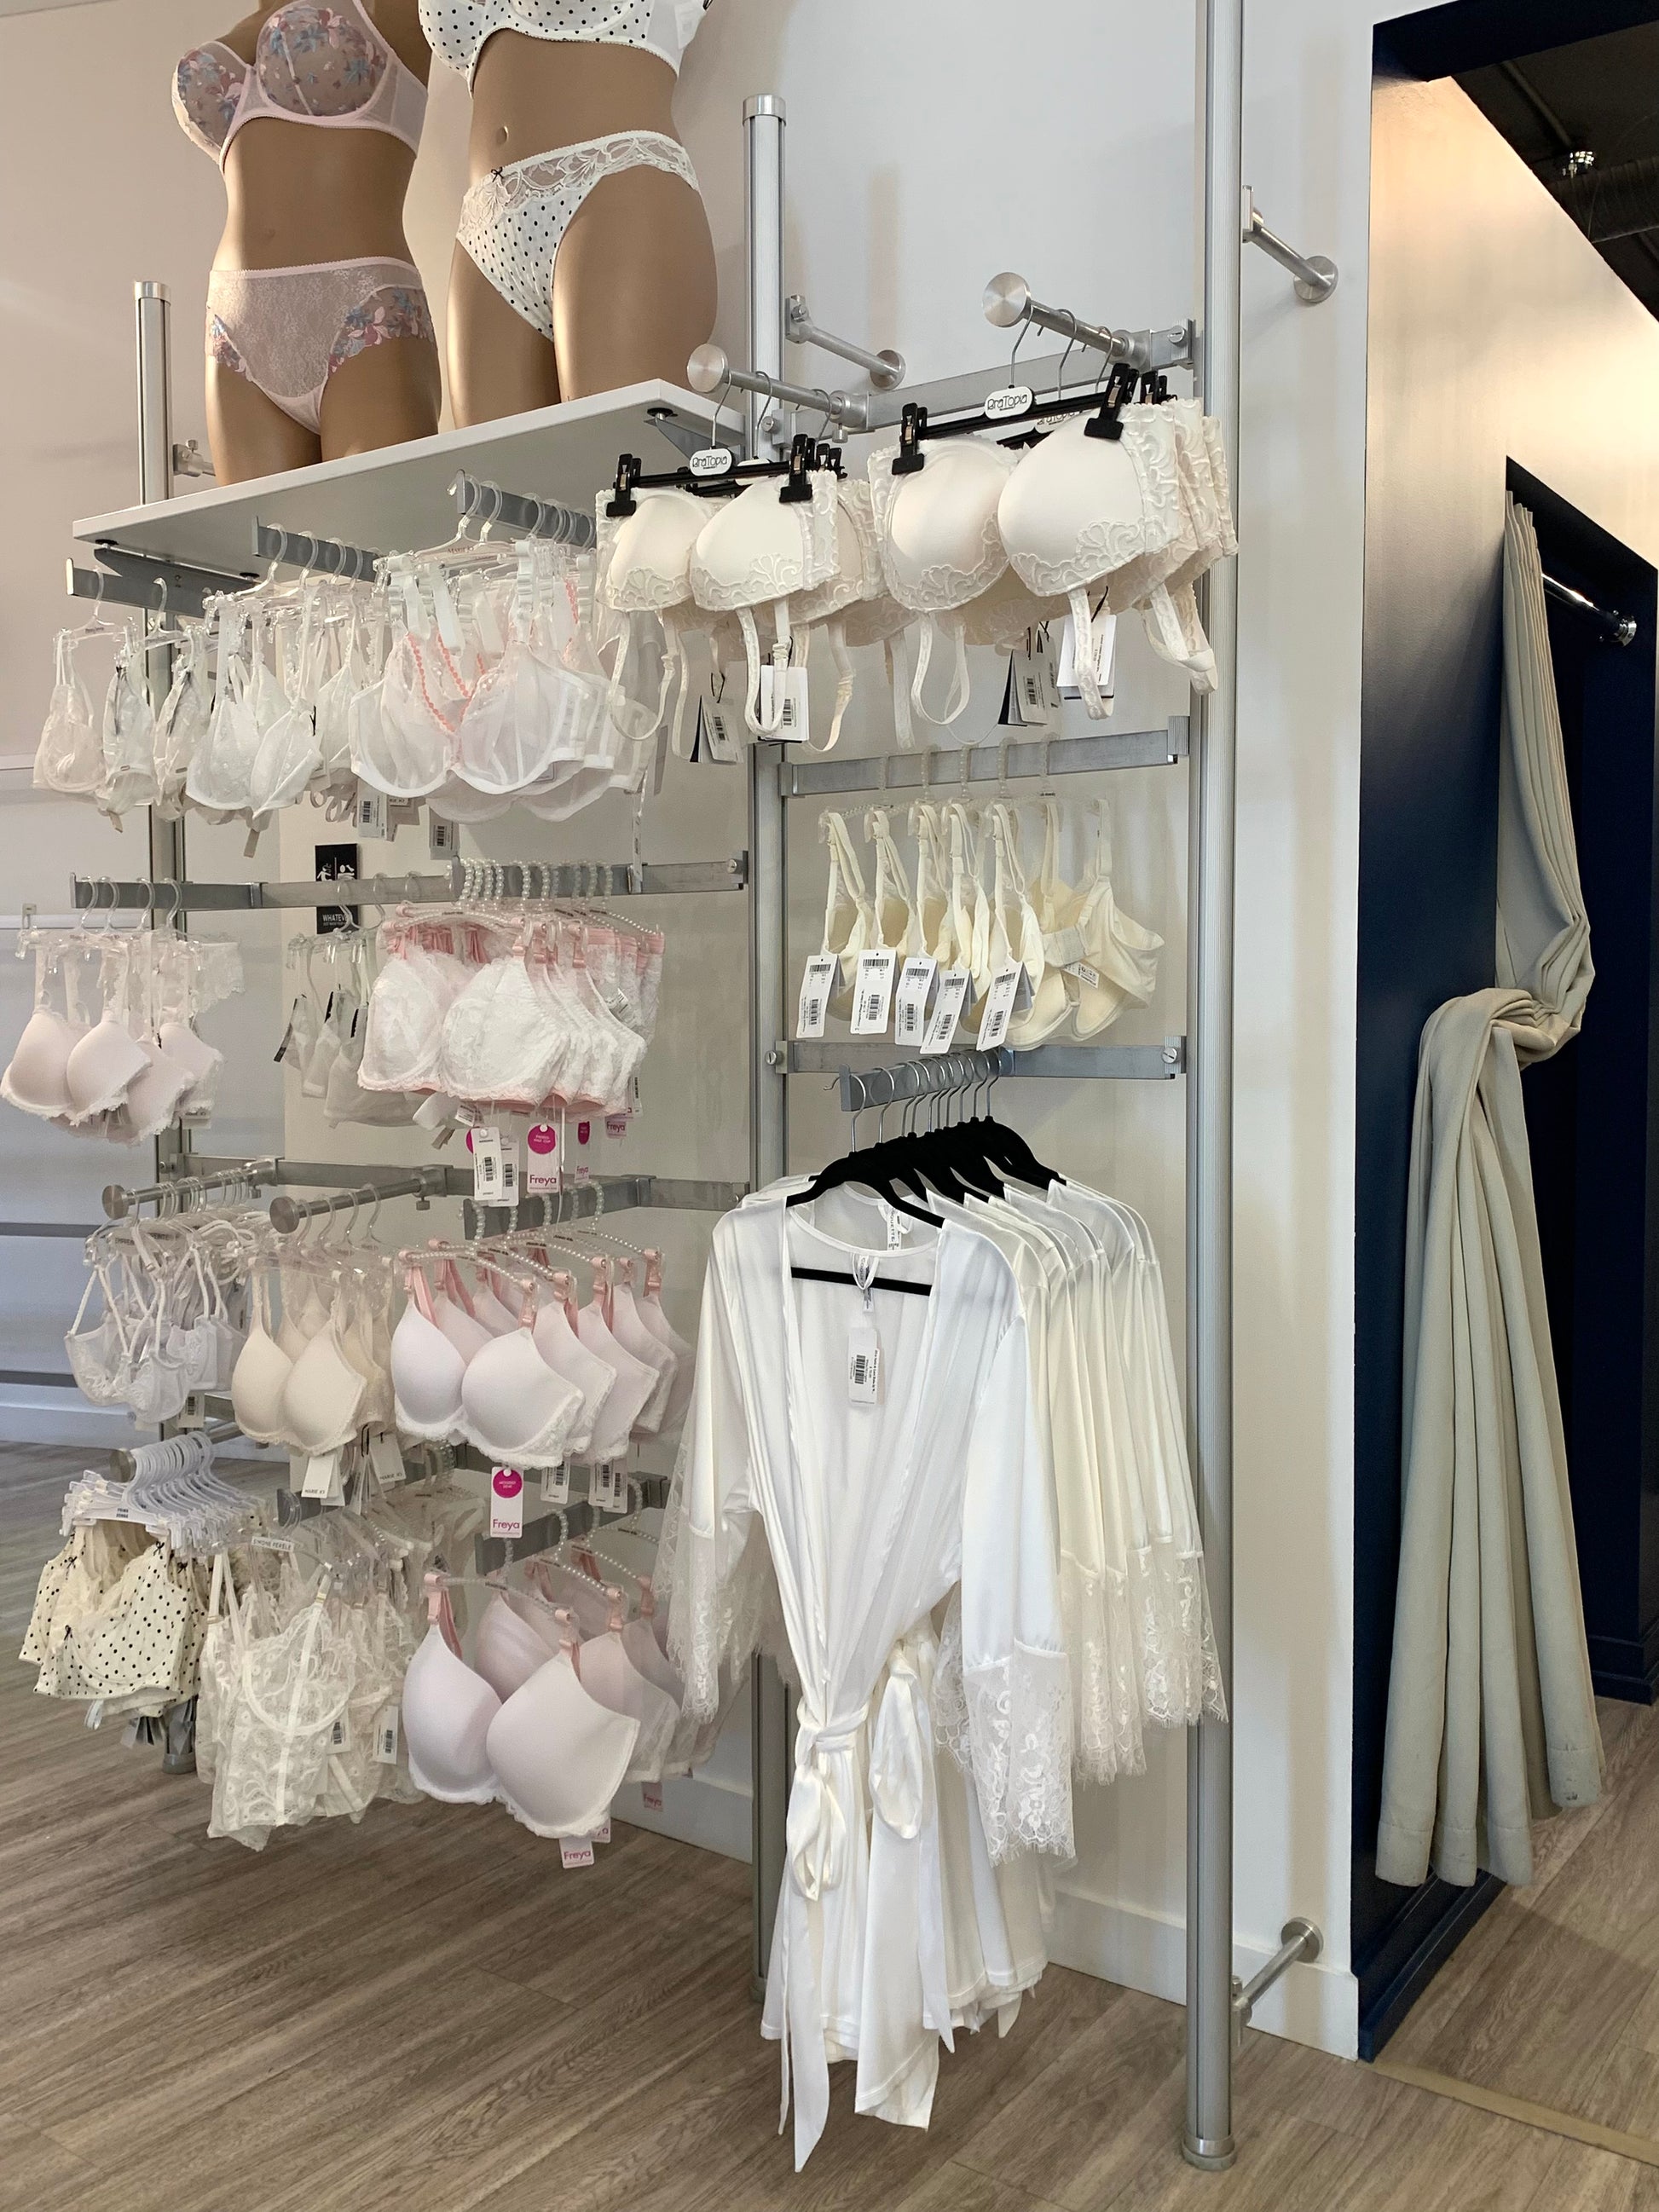 The Bride-To-Be's Ultimate Guide To Lingerie Shopping!